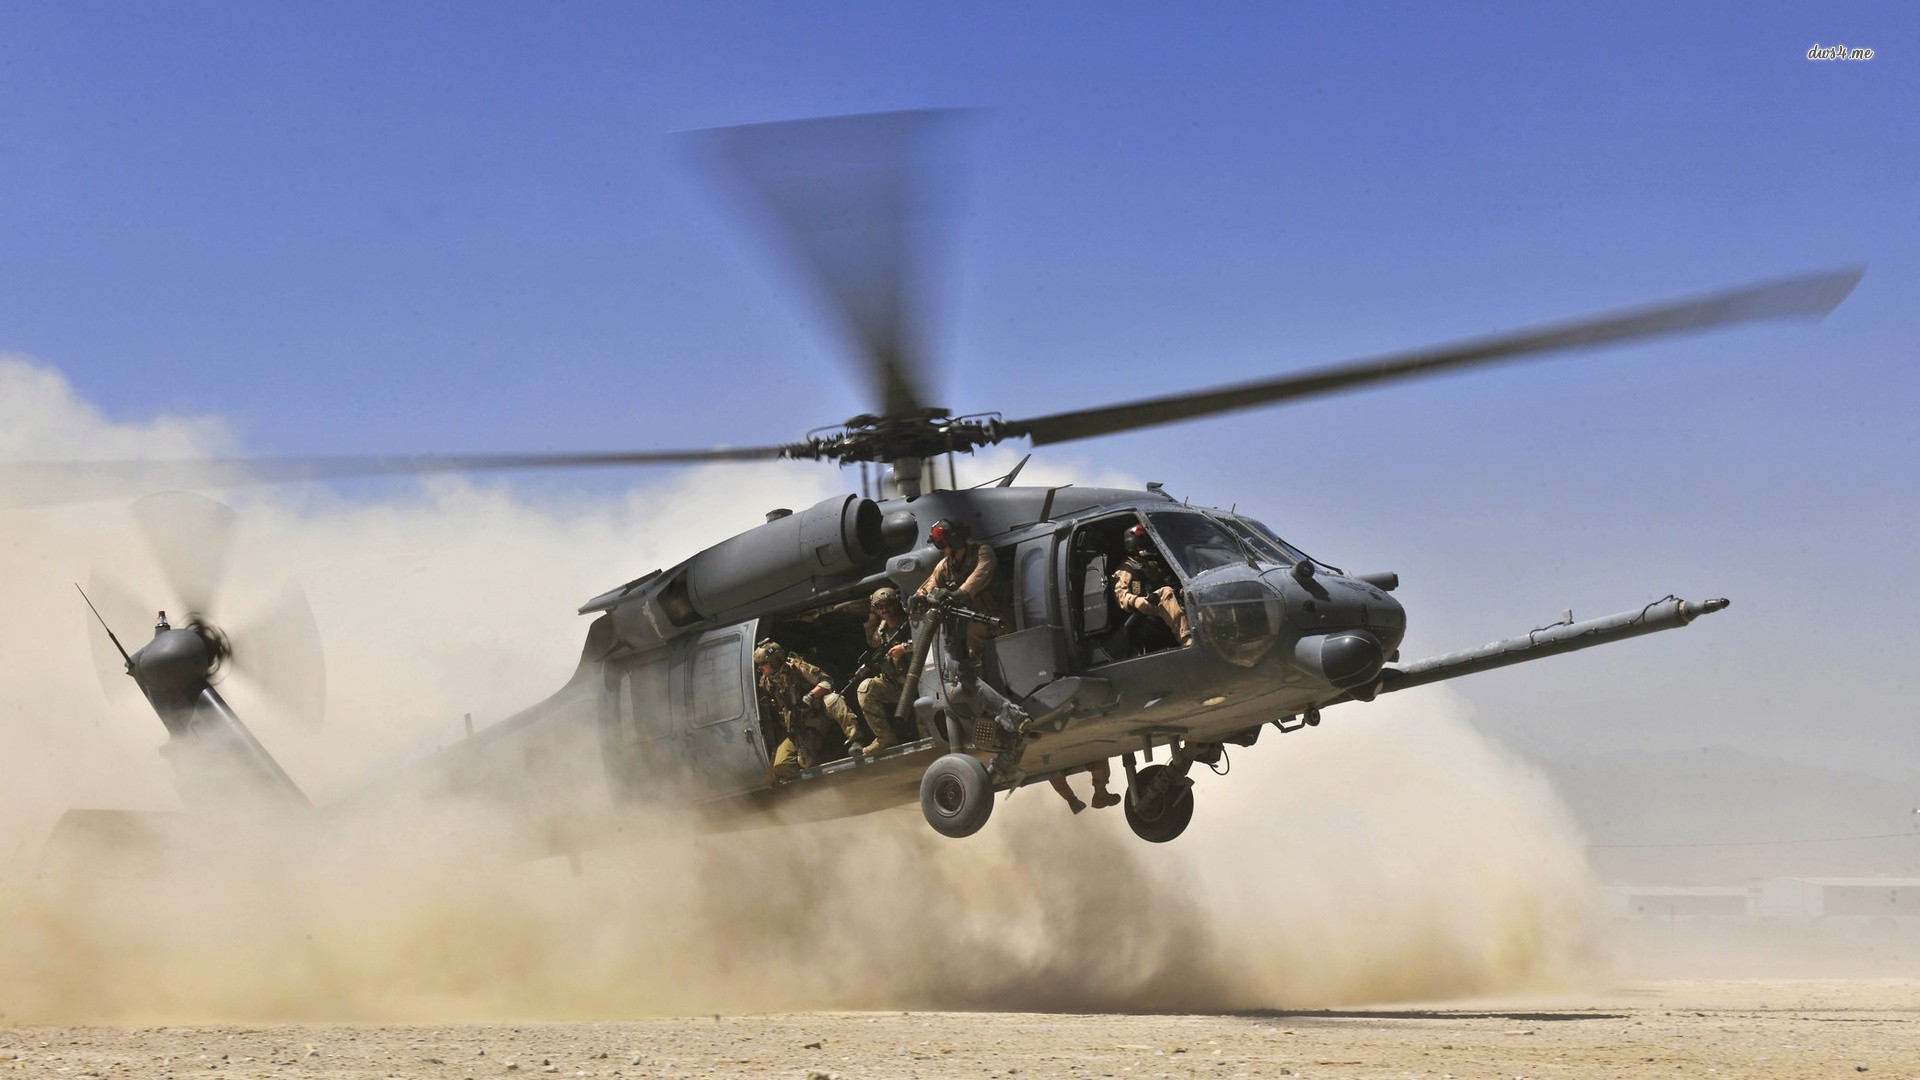 Free Download Sikorsky HH 60 Pave Hawk Wallpaper Aircraft Wallpaper 10521 [1920x1080] For Your Desktop, Mobile & Tablet. Explore Sikorsky HH 60 Pave Hawk Wallpaper. Sikorsky HH 60 Pave Hawk Wallpaper, Hawk Wallpaper, Hawk Wallpaper